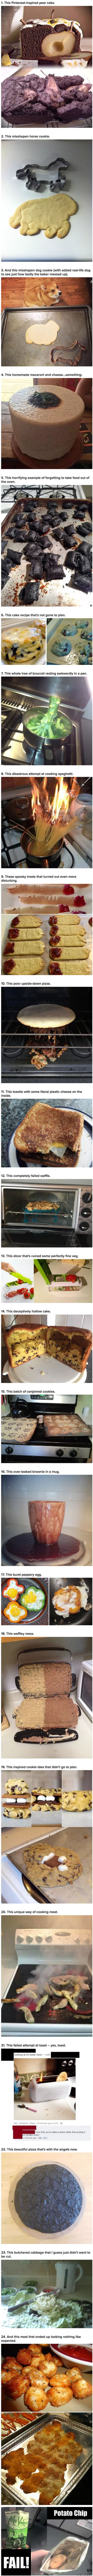 24 of the worst attempts at cooking ever